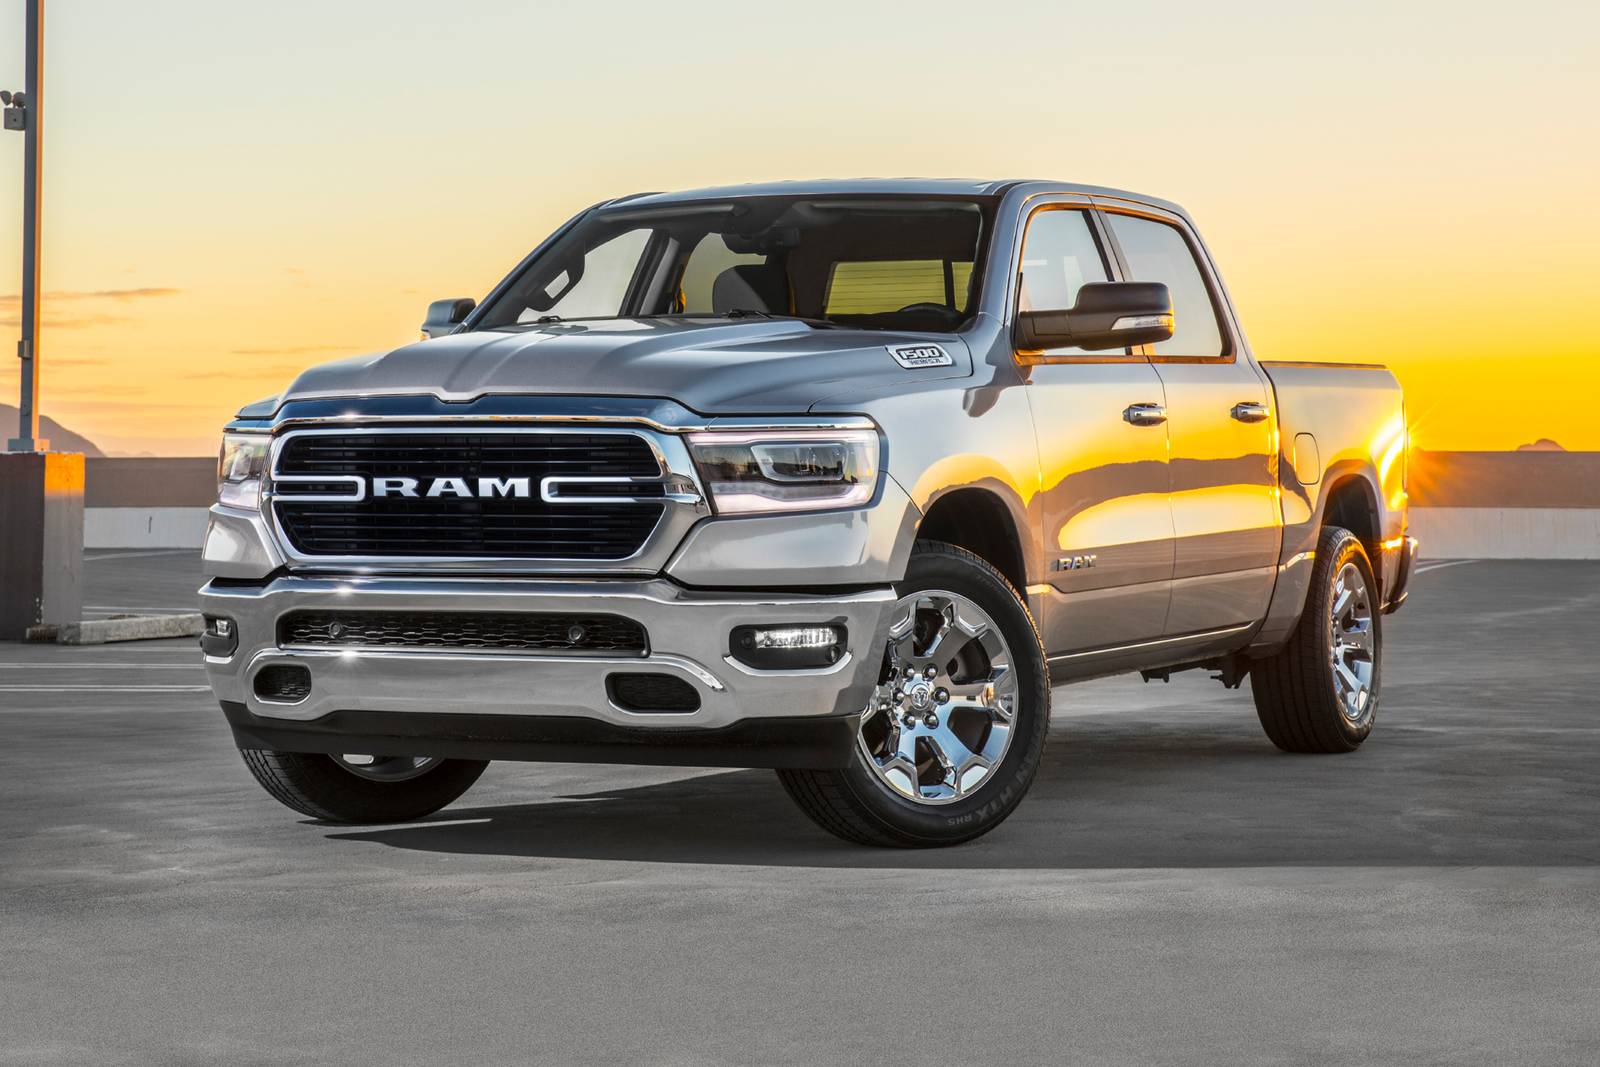 Vidunderlig ris Fundament 2022 Ram 1500 Prices, Reviews, and Pictures | Edmunds